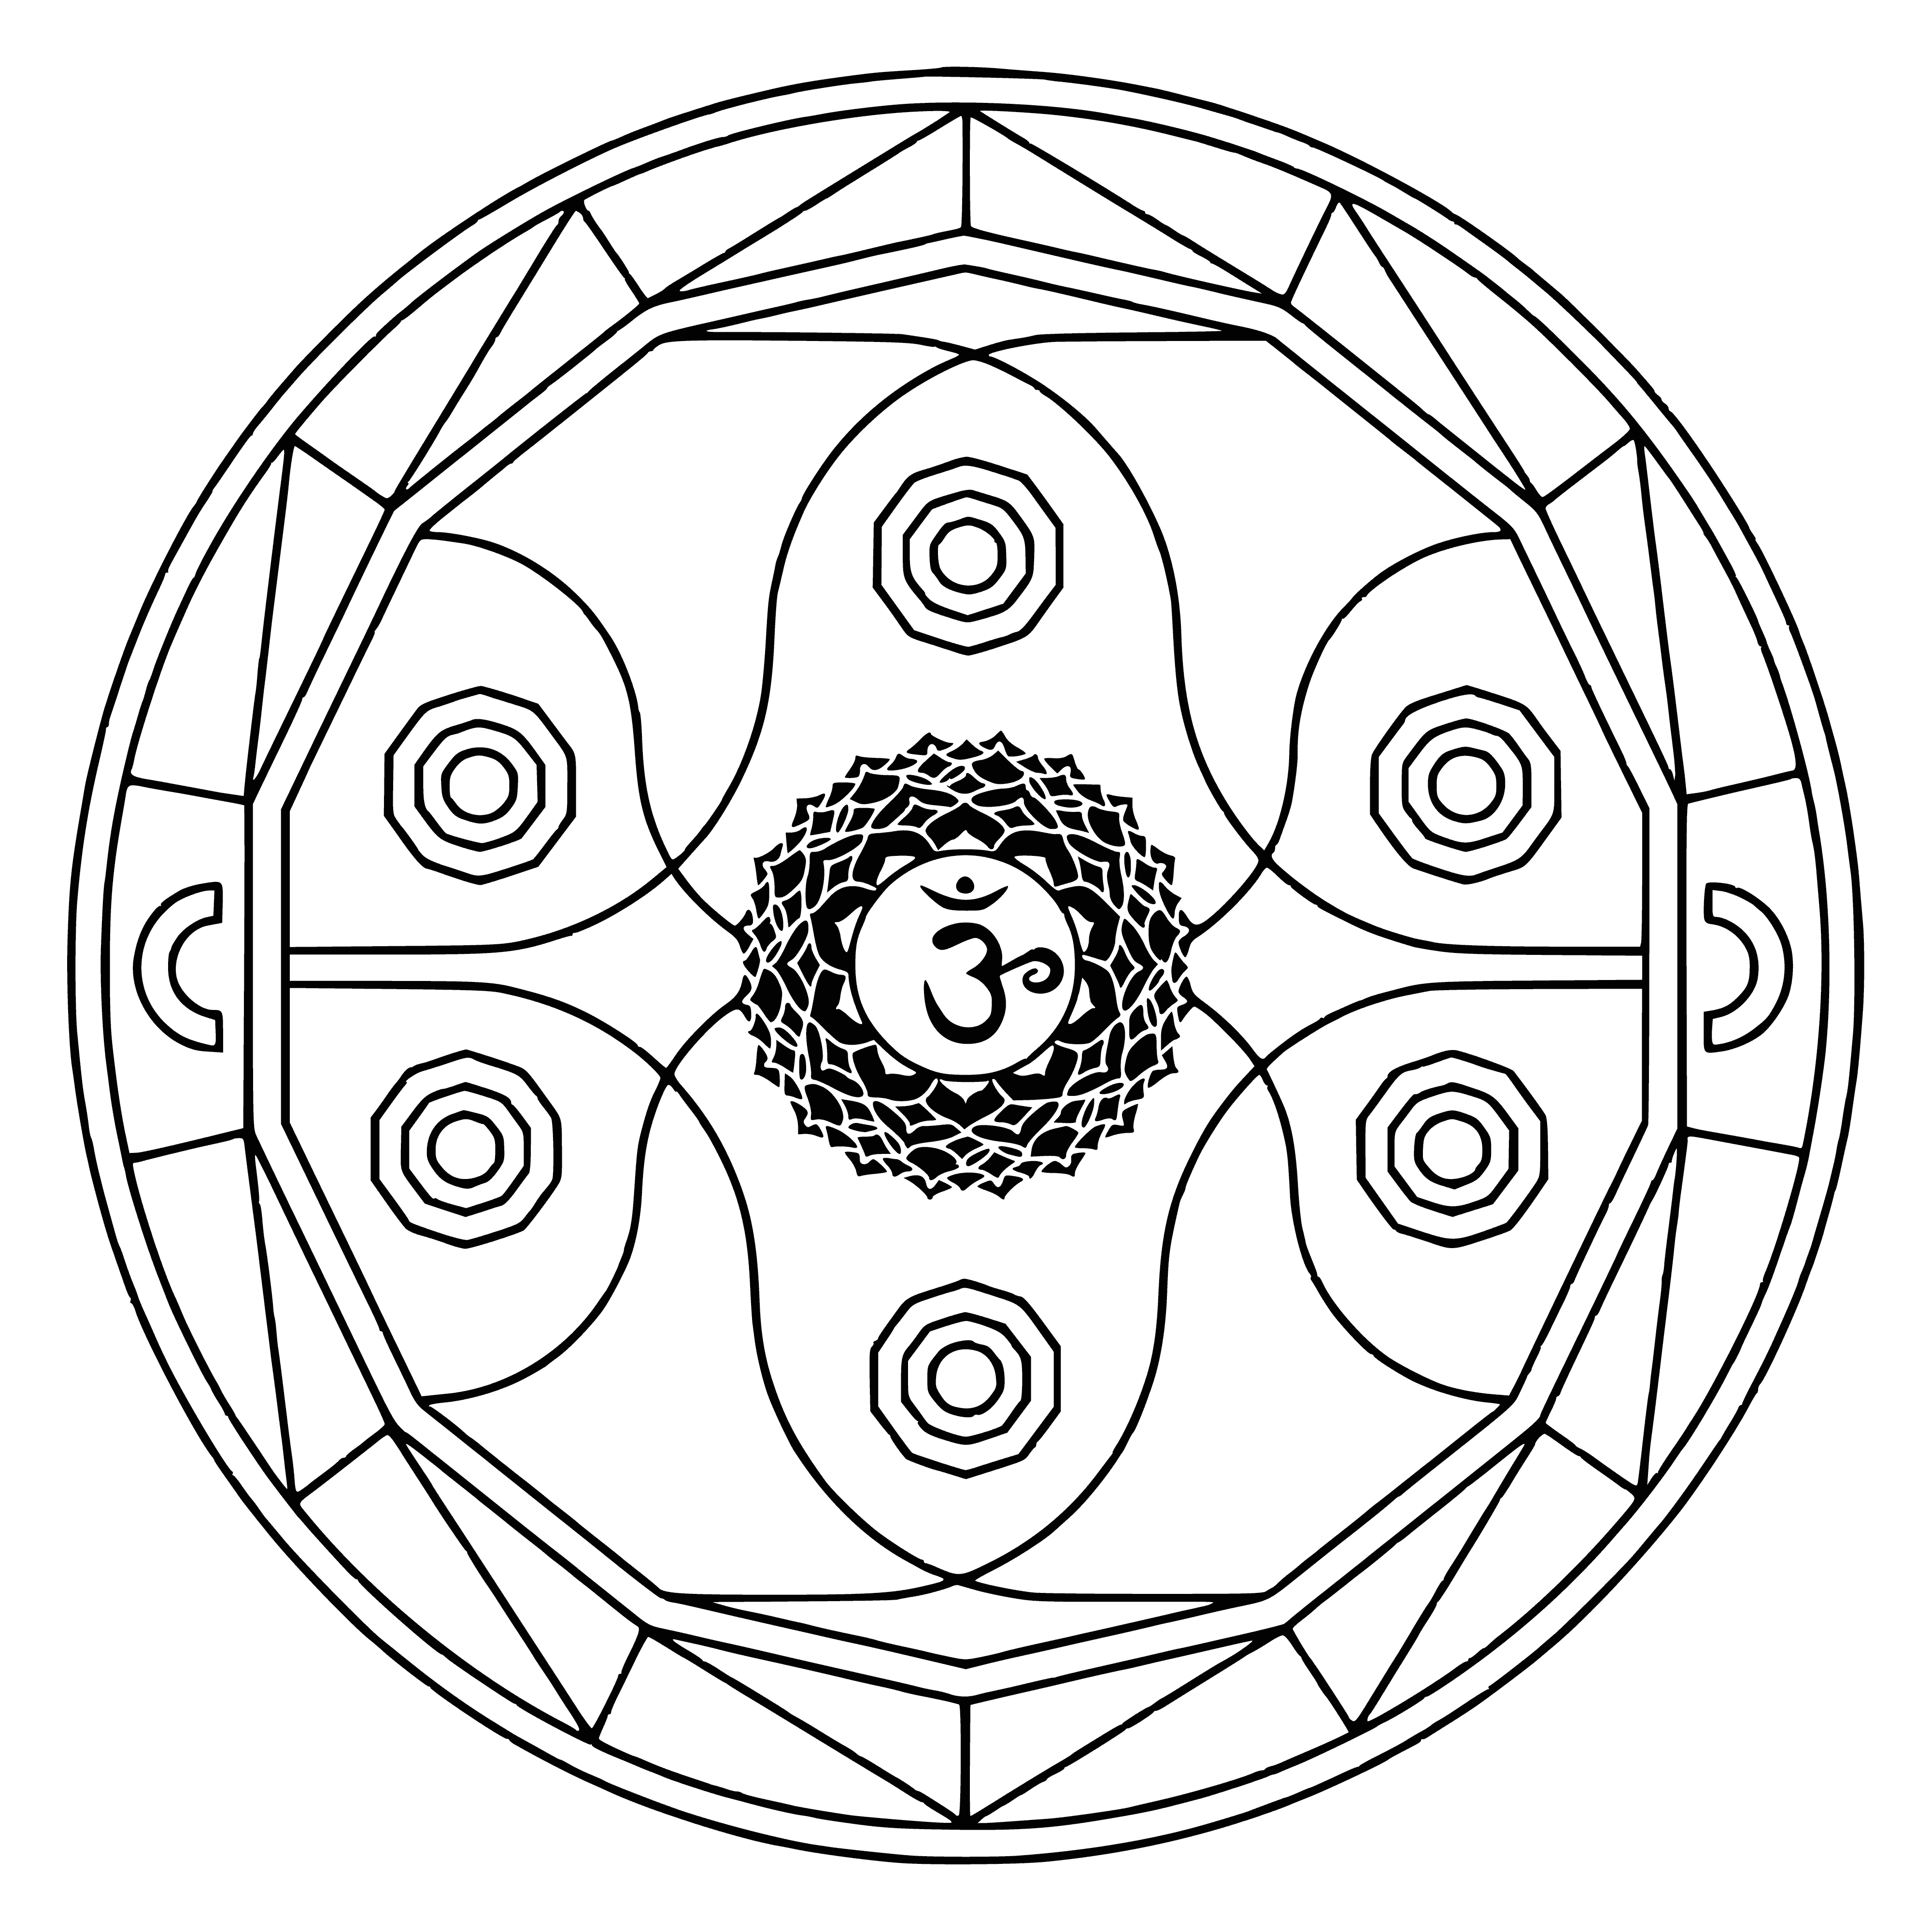 coloring page: Mandala has central lotus flower of yellow, orange, red, 8 spokes ending in blue circles, geometric shapes in multiple colors, & top crescent moon in blue.